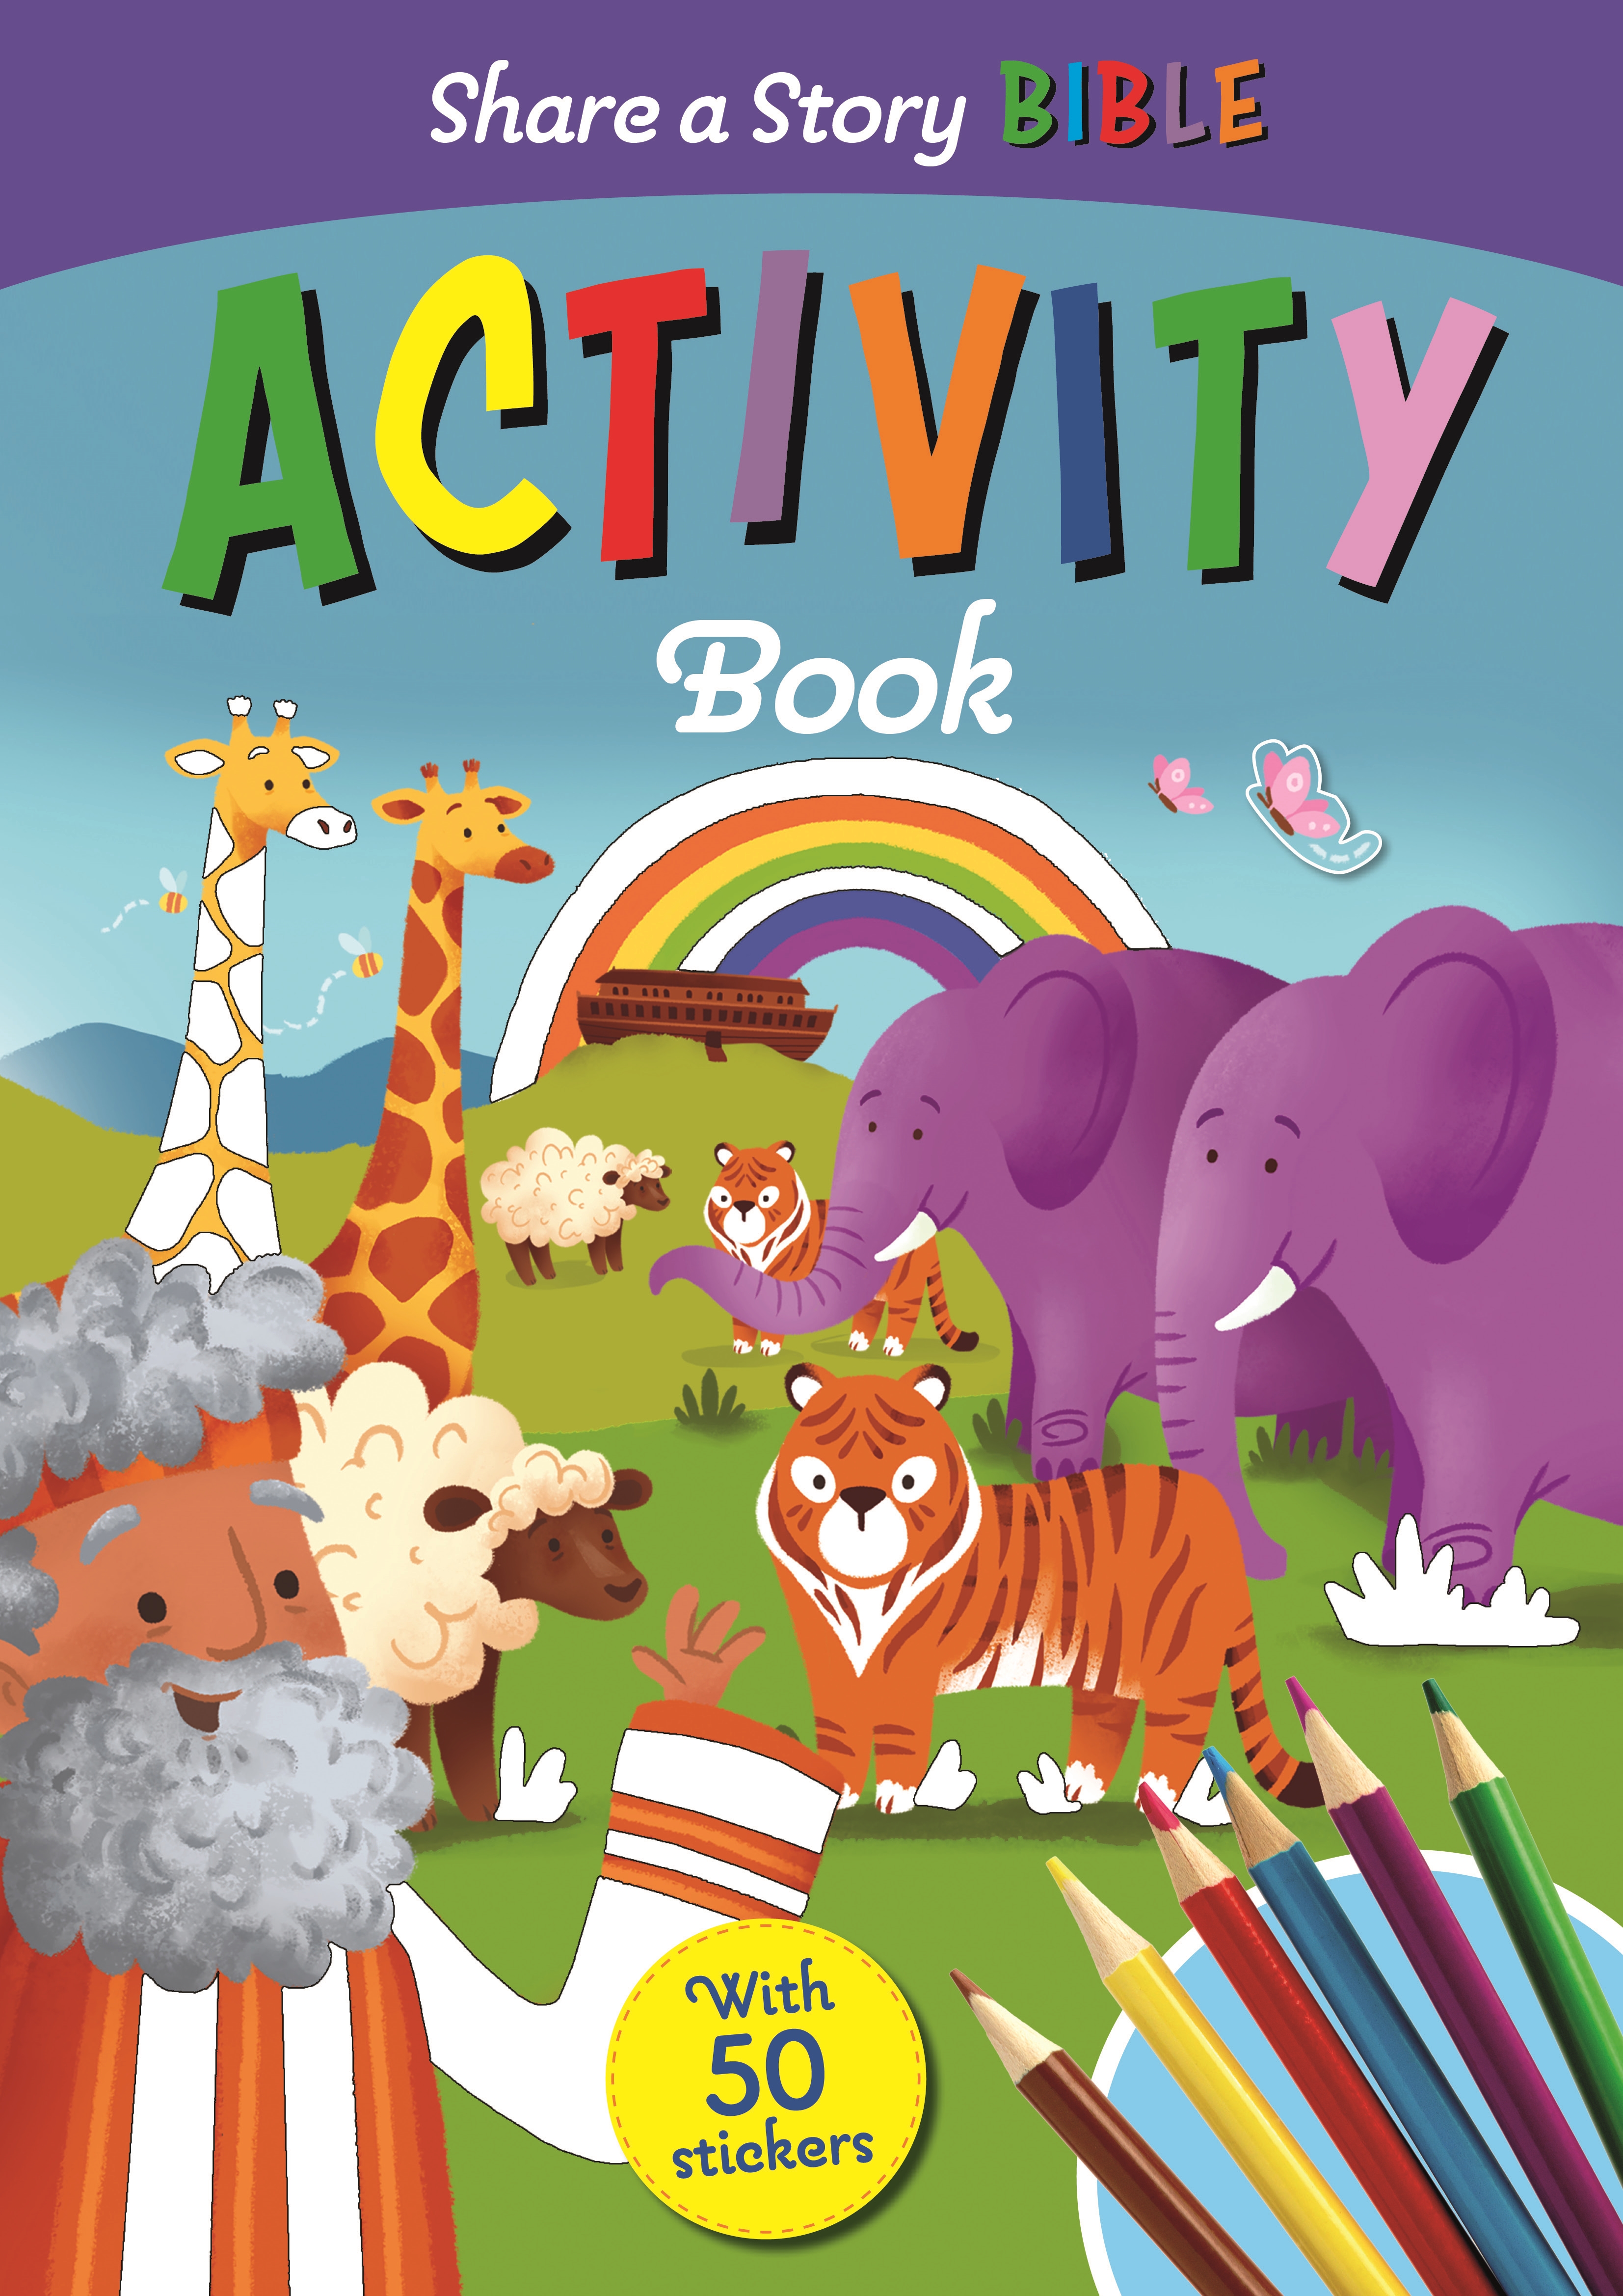 Share a Story Bible Activity Book 9780745979984 | Fast Delivery at Eden